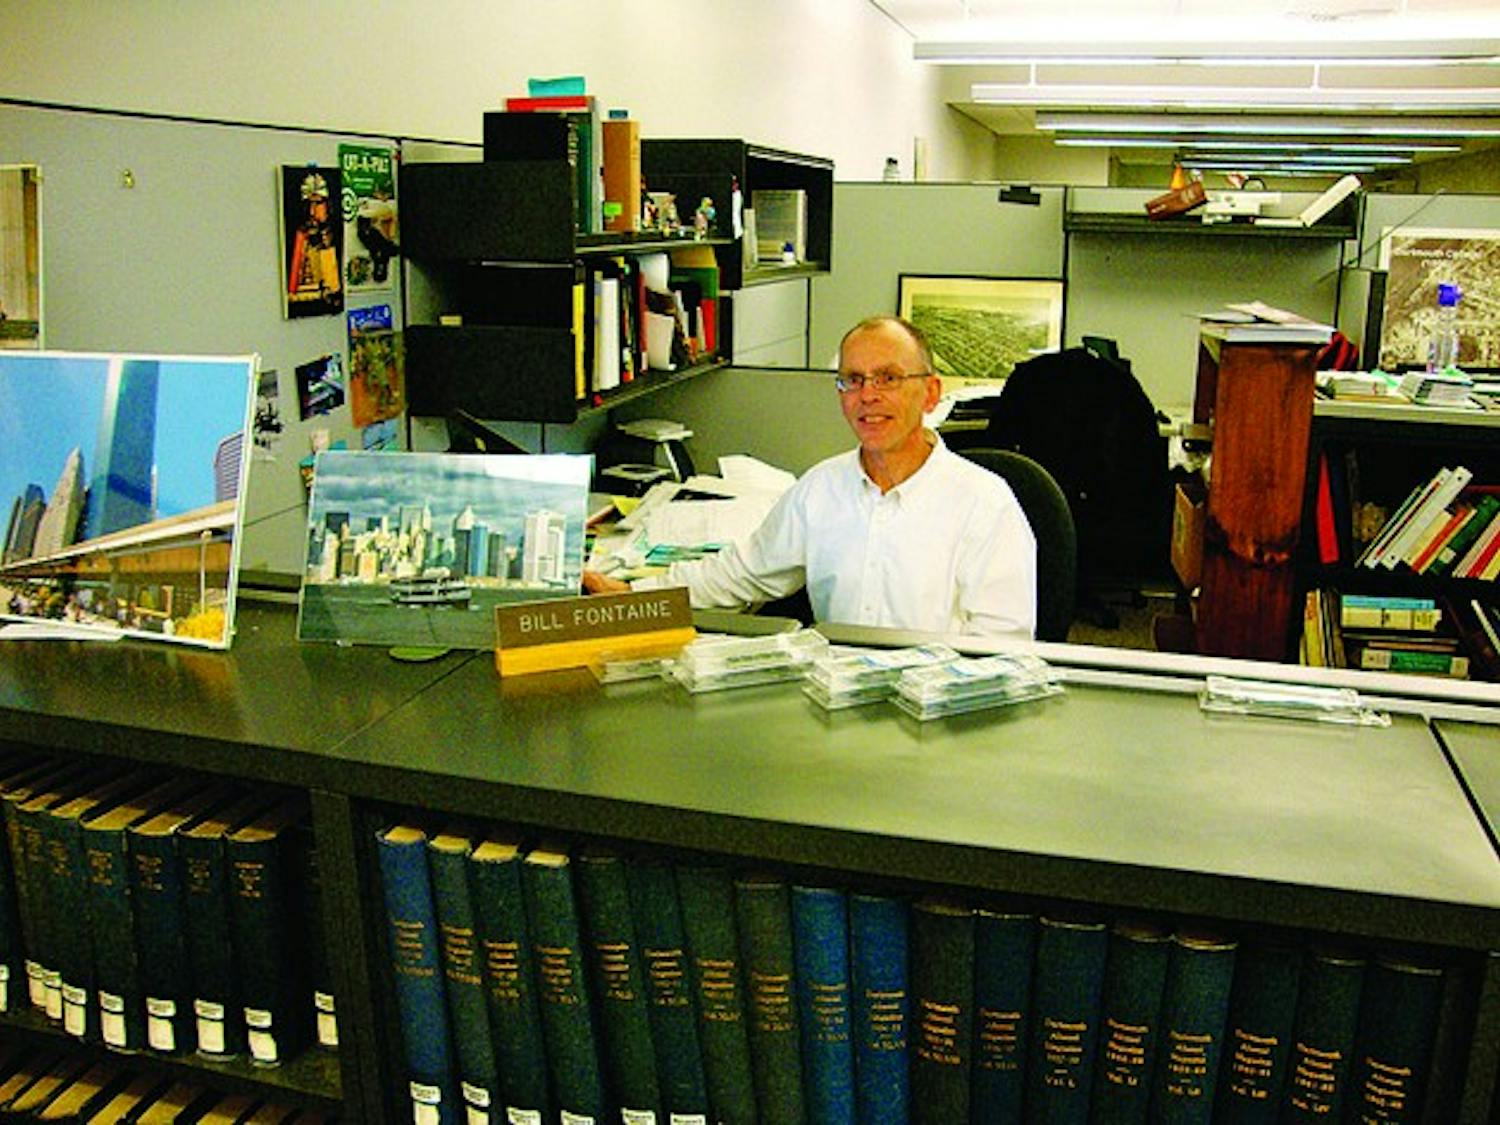 Librarians at the nine libraries in the College system have responsibilities that range from preservation and acquisition to teaching classes.